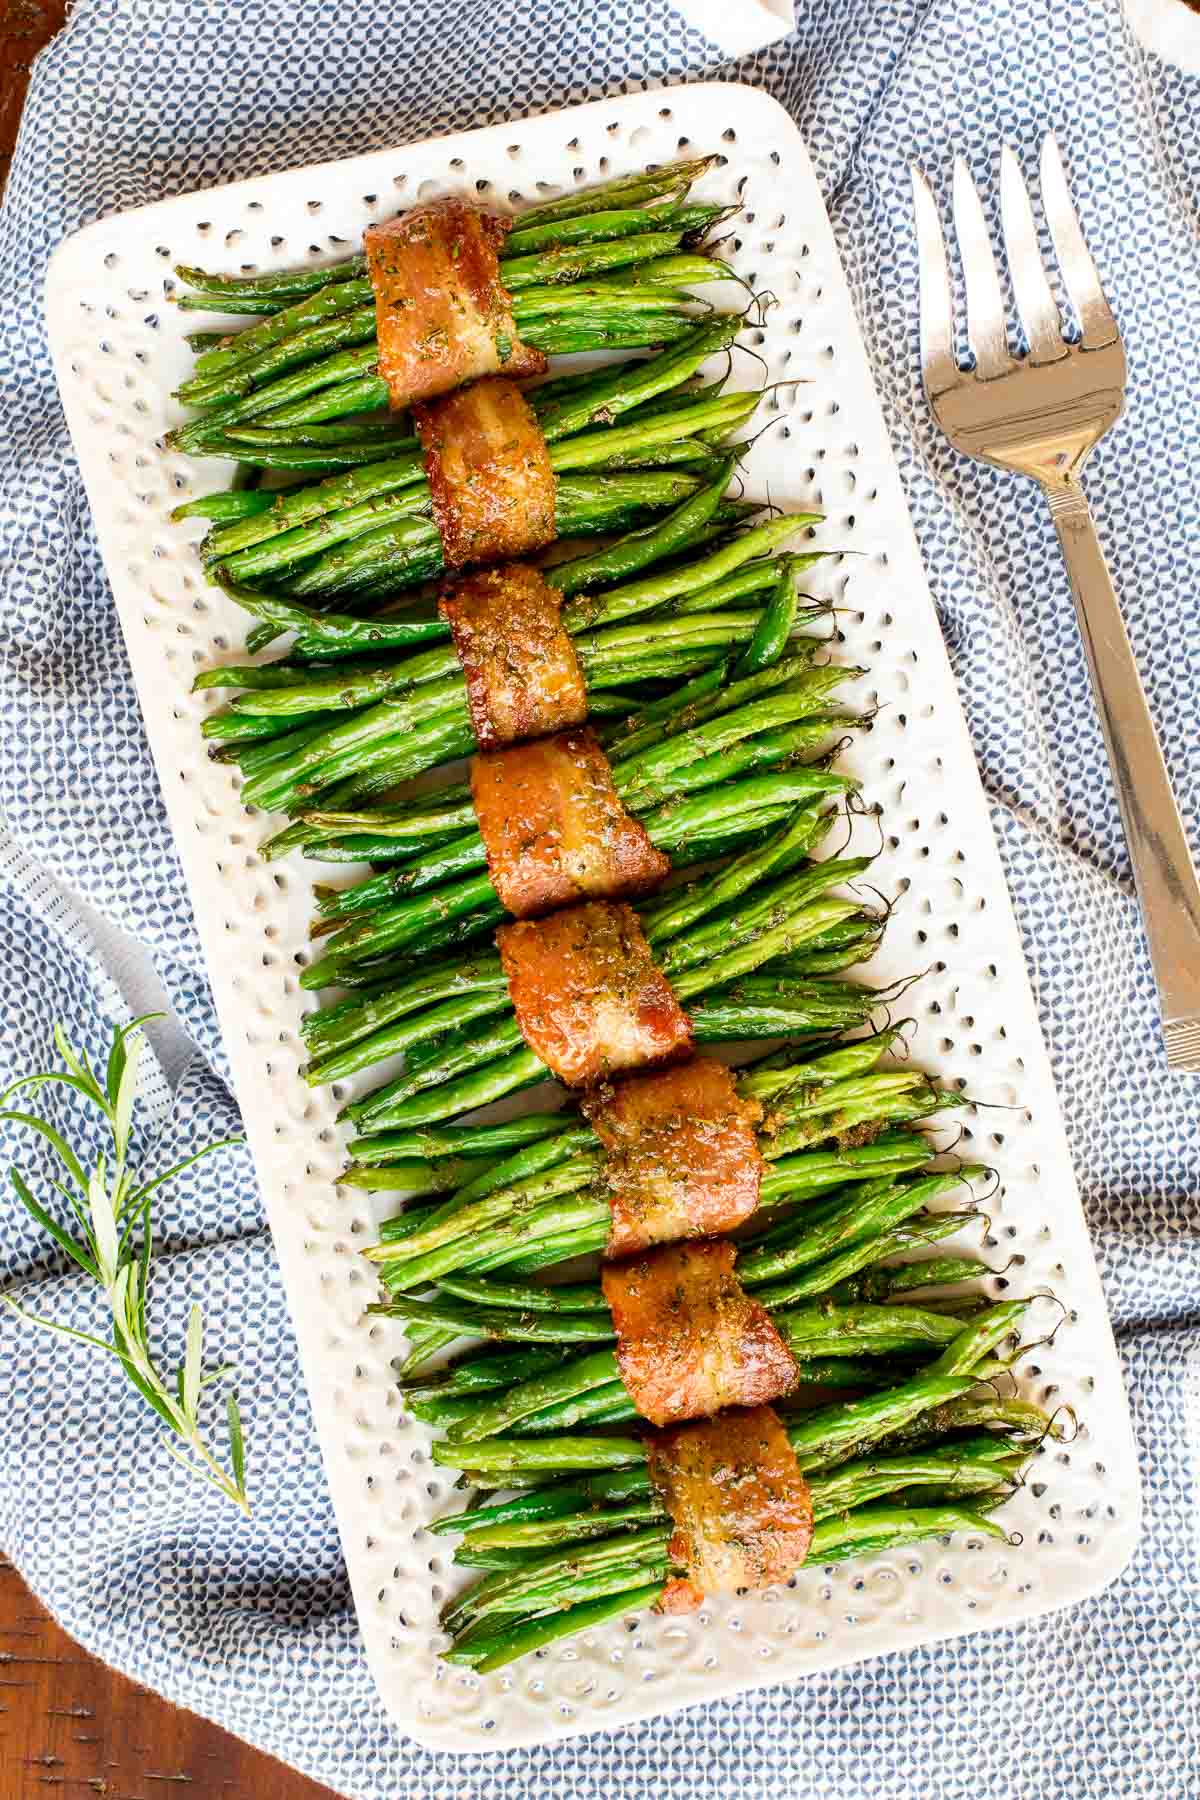 Vertical overhead photo of Make-Ahead Bacon Wrapped Green Beans wrapped in bundles on a white lattice serving platter.